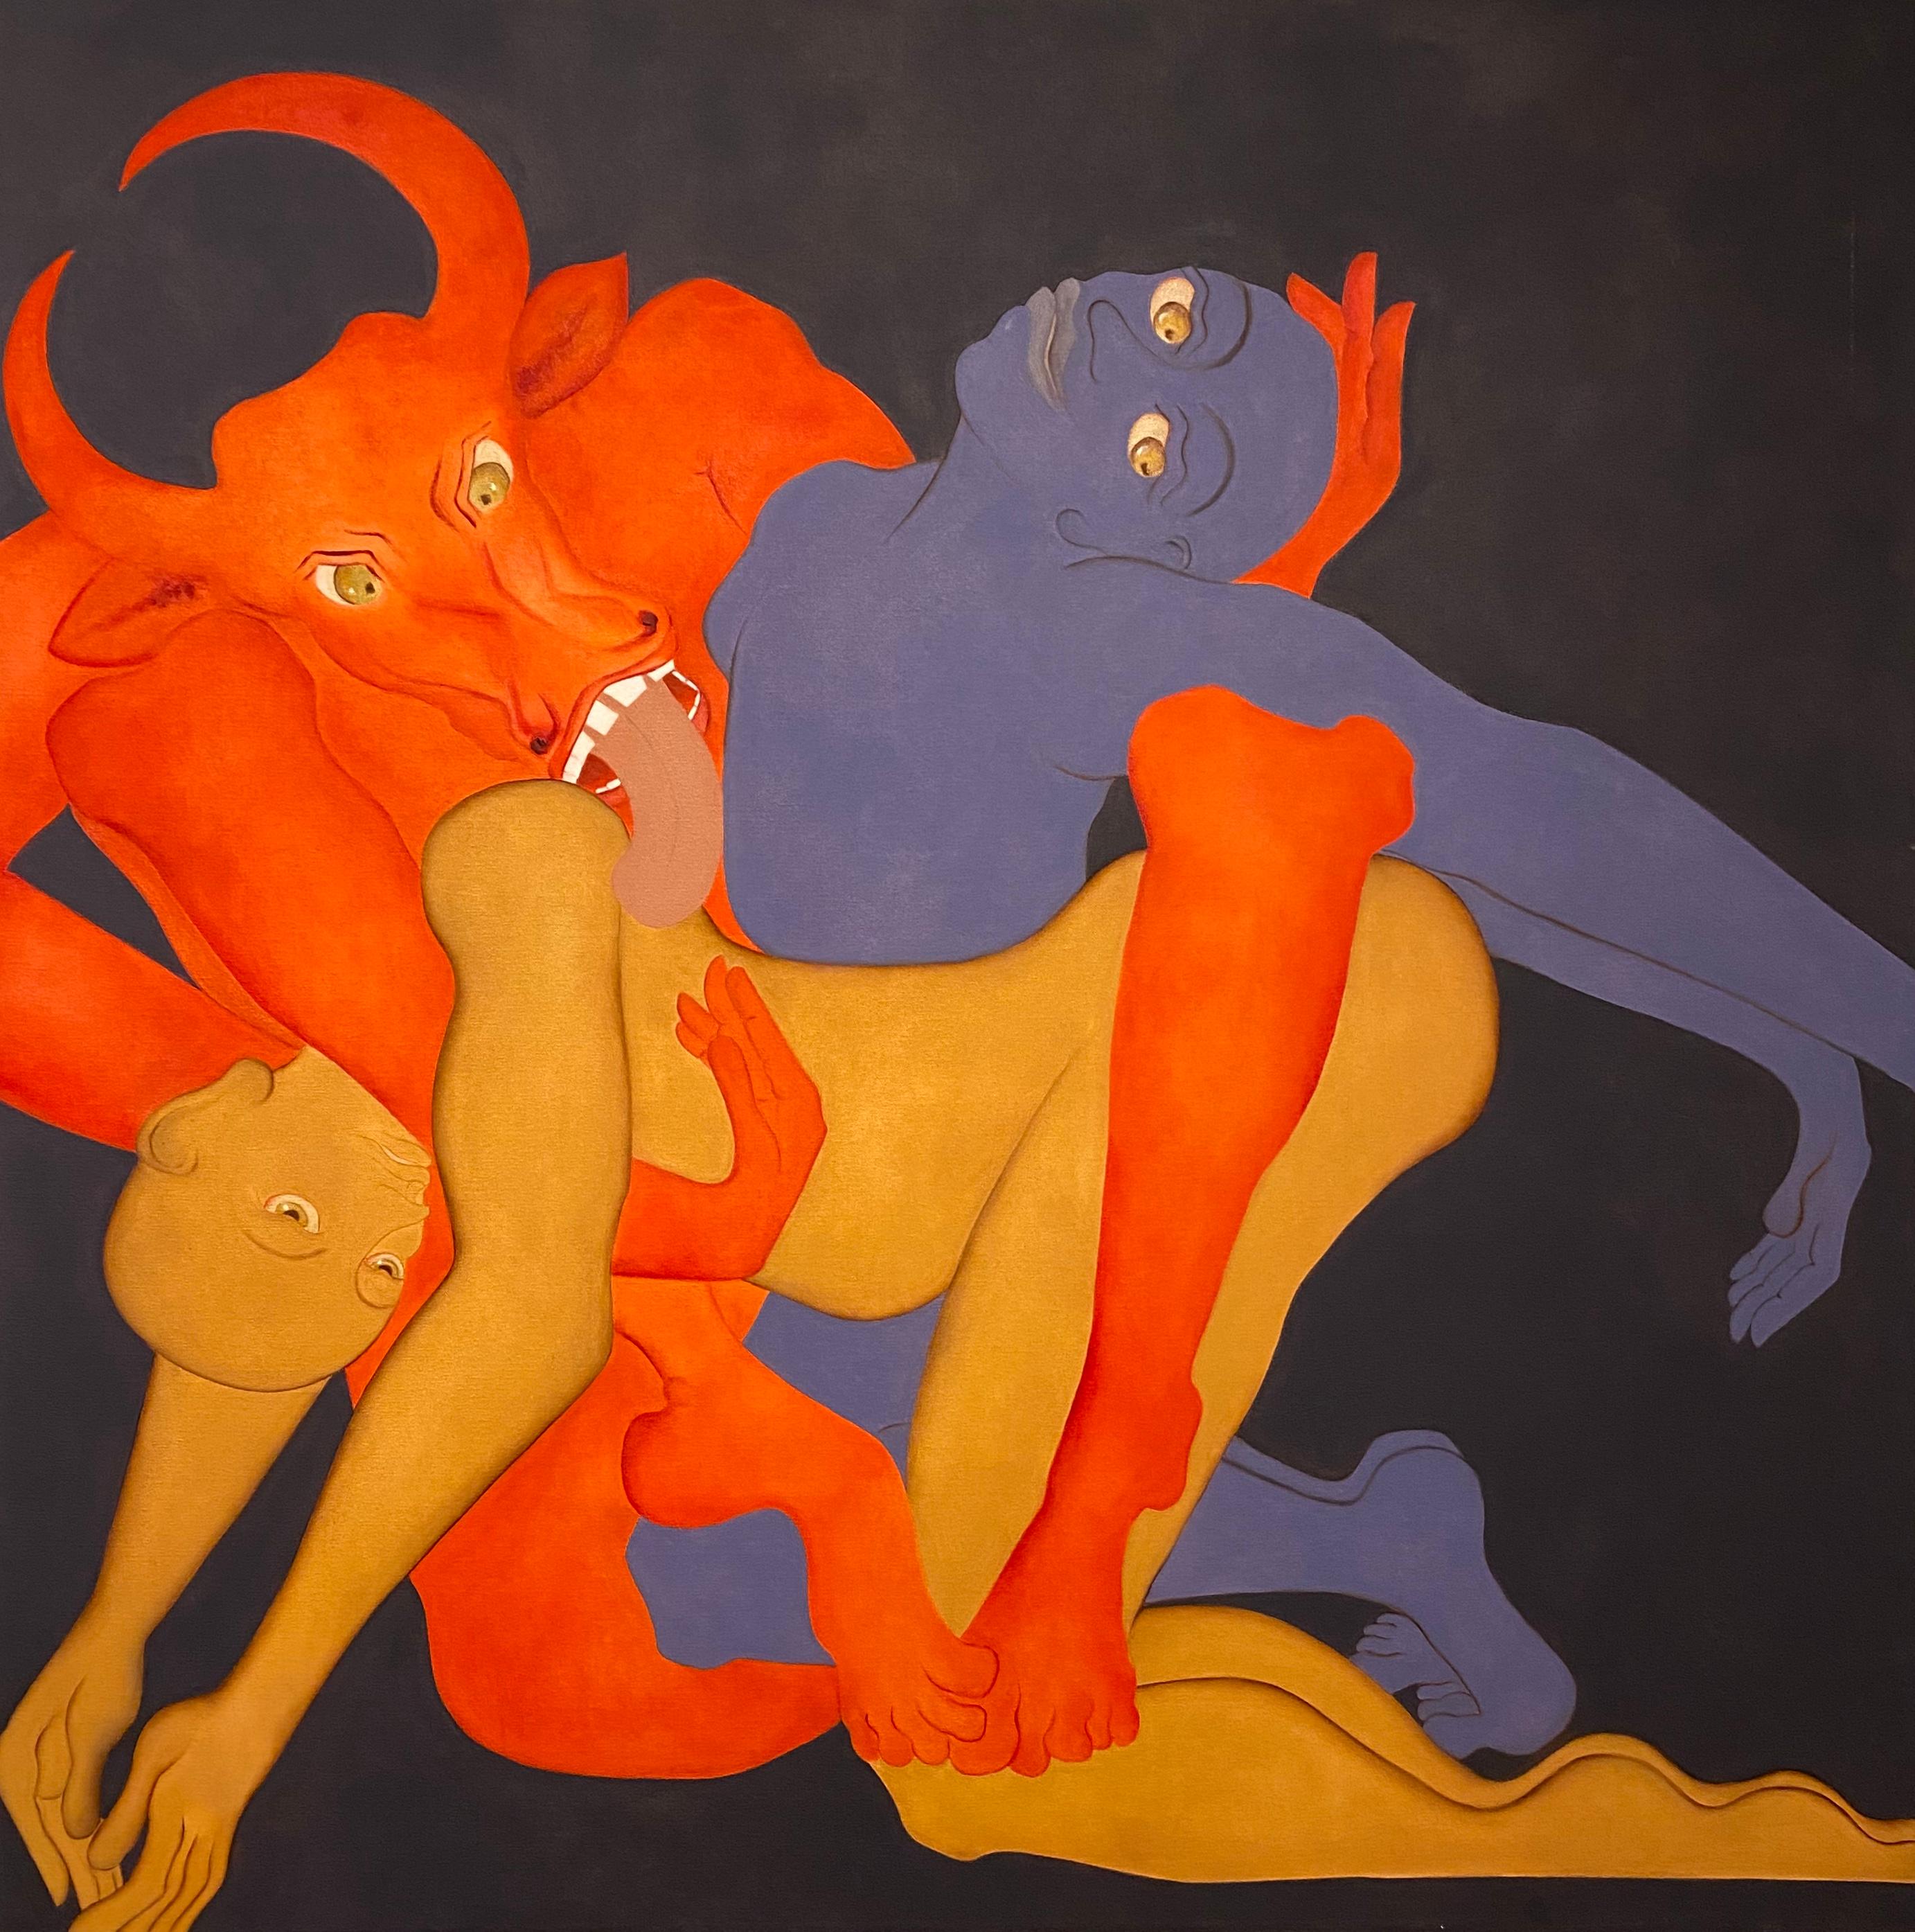 This oil on canvas painting is inspired by the Hindu Goddess  Kaamdhenu, the mother of all cows and Bhatt’s  recurring symbol of desire. The bovine figure cradles two humanistic figures – one lighter and one darker – suggesting the capacity of human